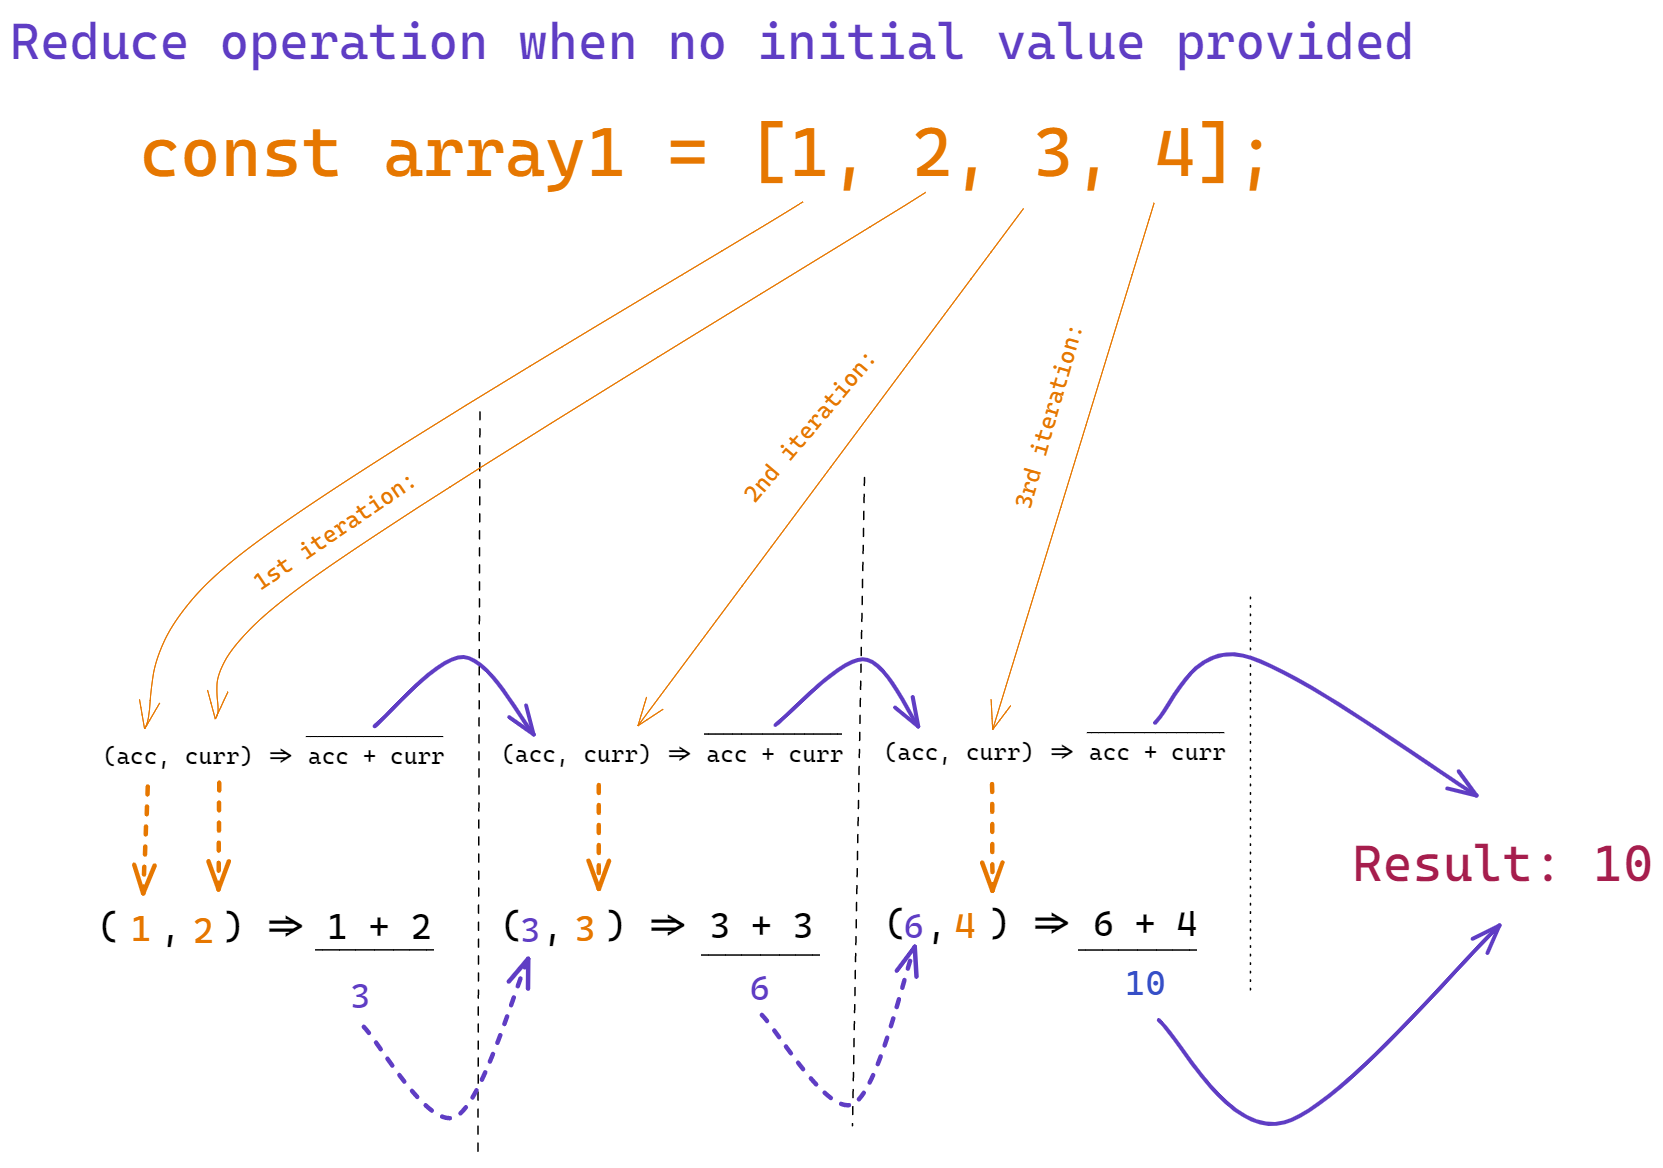 A diagram that describes how reduce operation works with an array of numbers when no initial value is provided